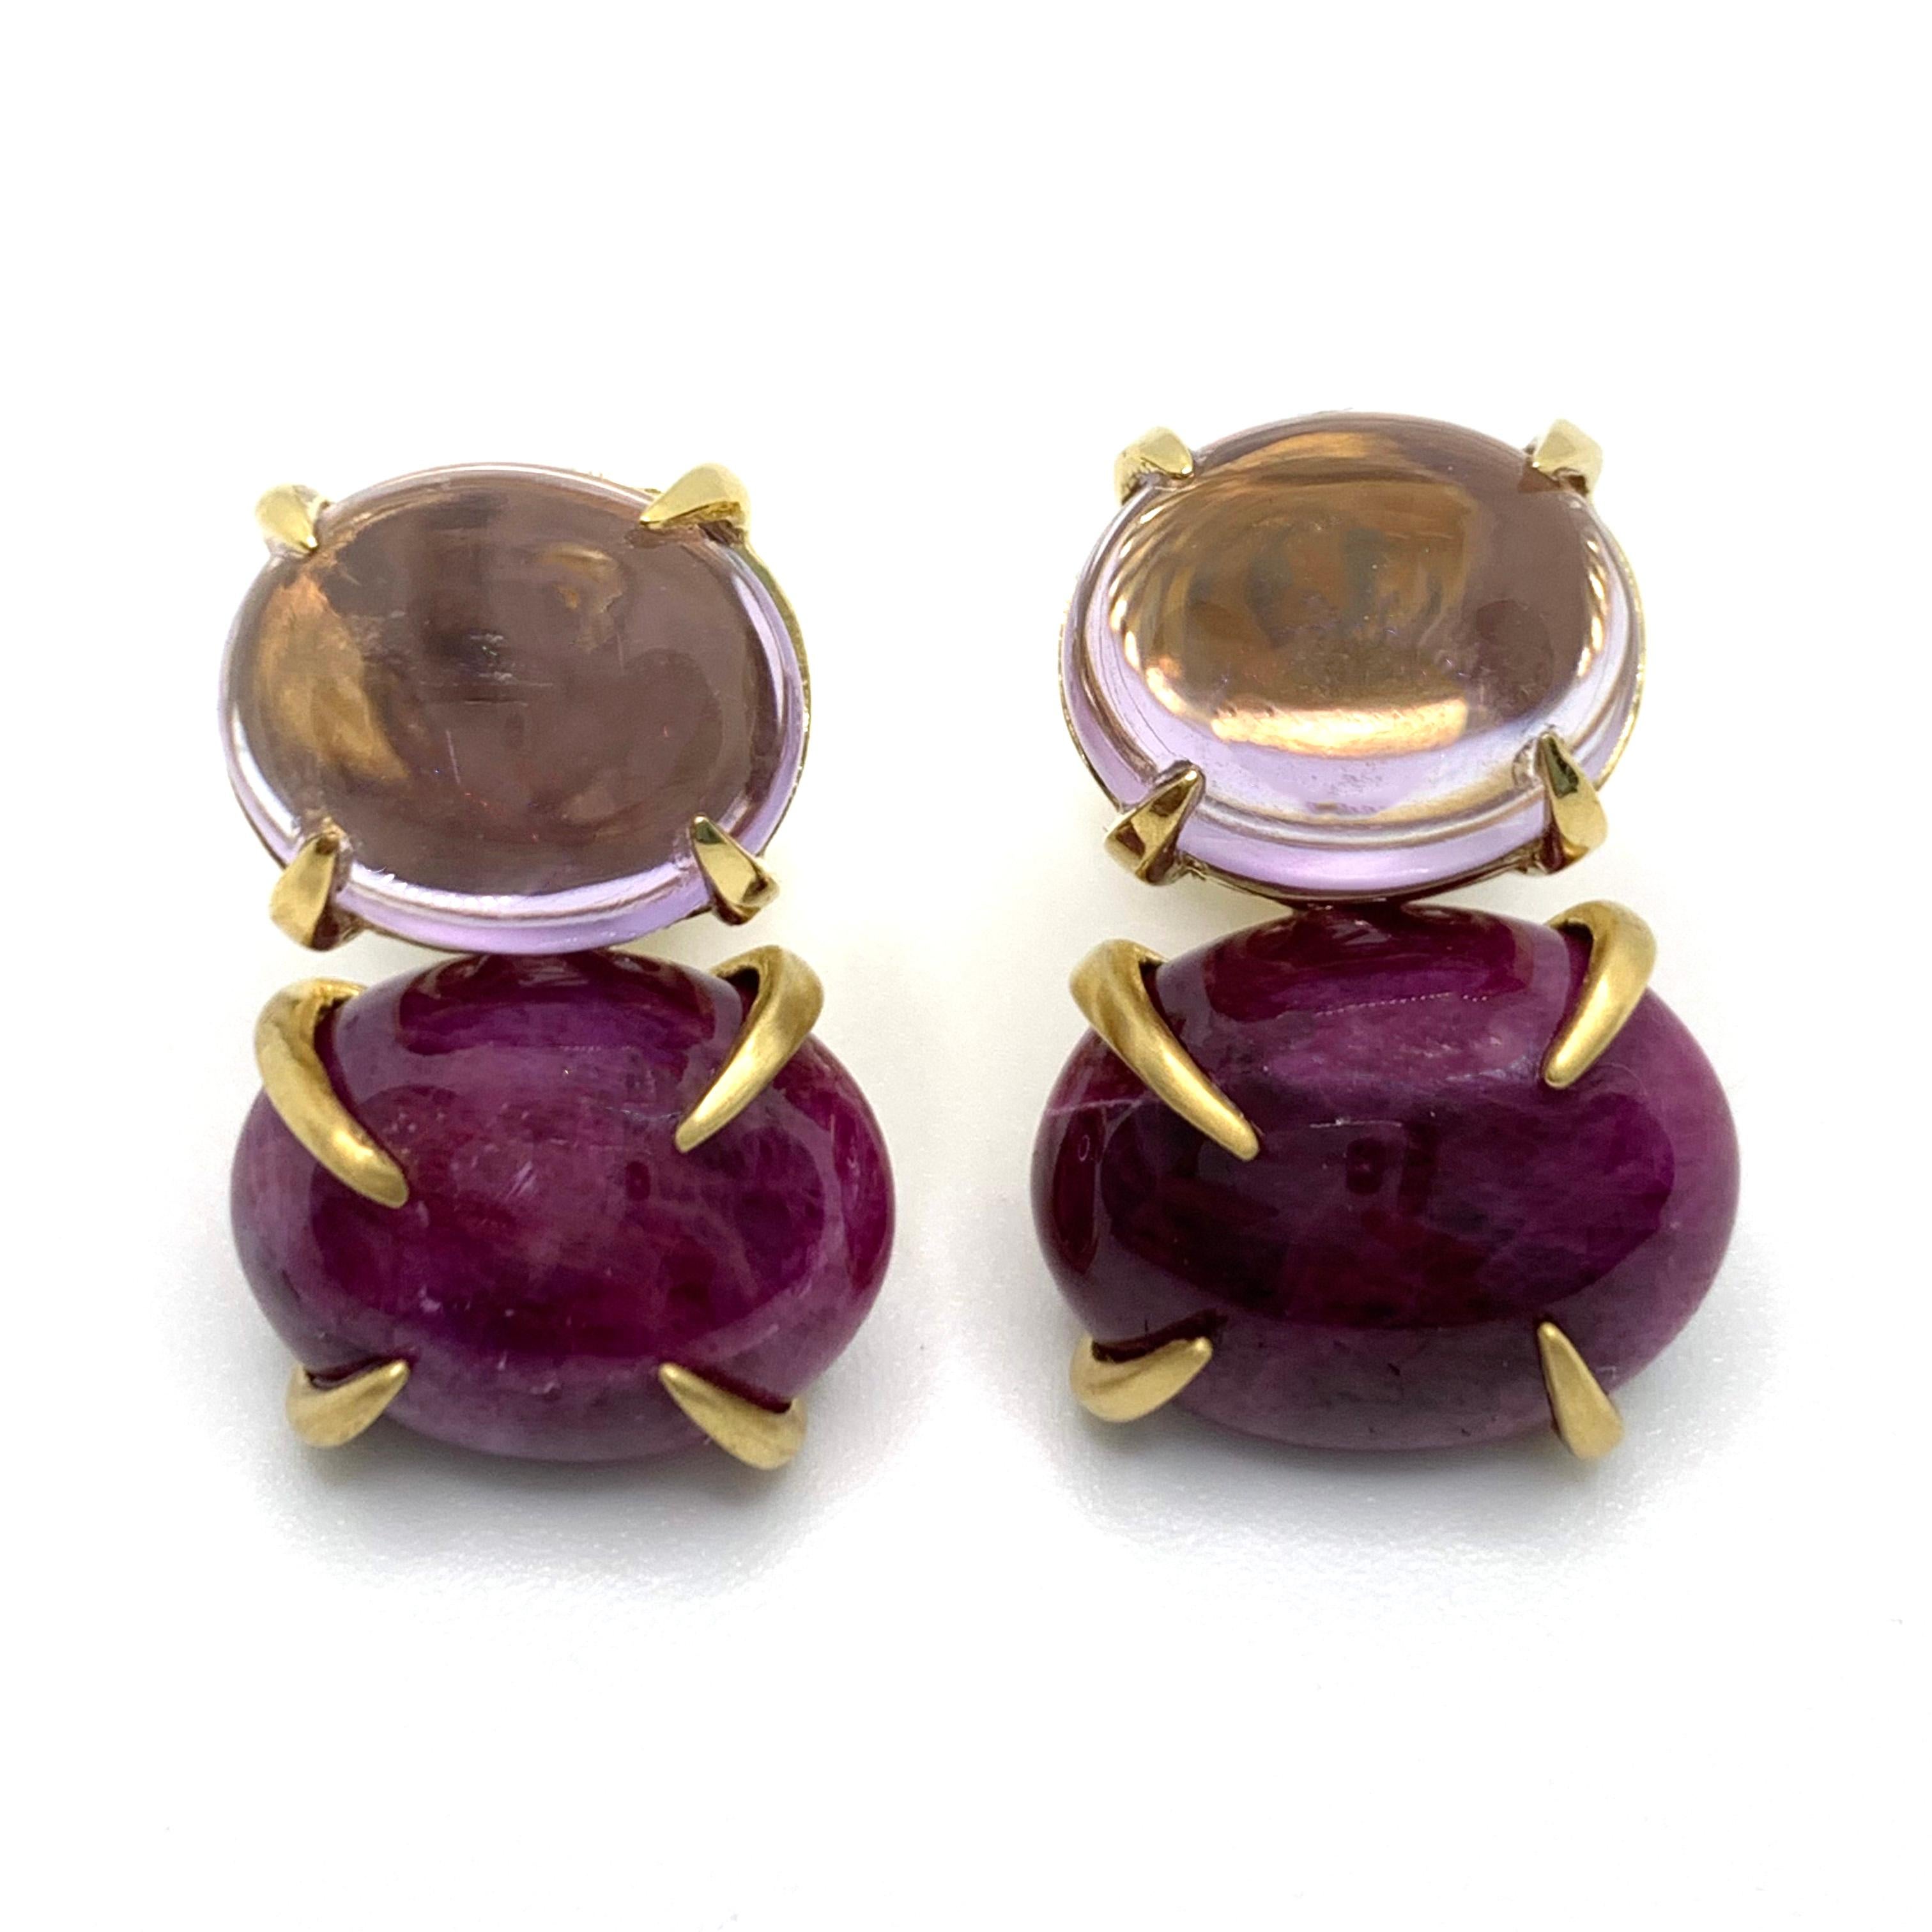 Stunning Bijoux Num Double Oval Cabochon-cut Amethyst and Ruby Vermeil Earrings. 

The earrings feature a pair of beautiful oval cabochon-cut Brazilian amethyst (very clear) and a pair of oval cabochon-cut African ruby, handset in 18k gold vermeil